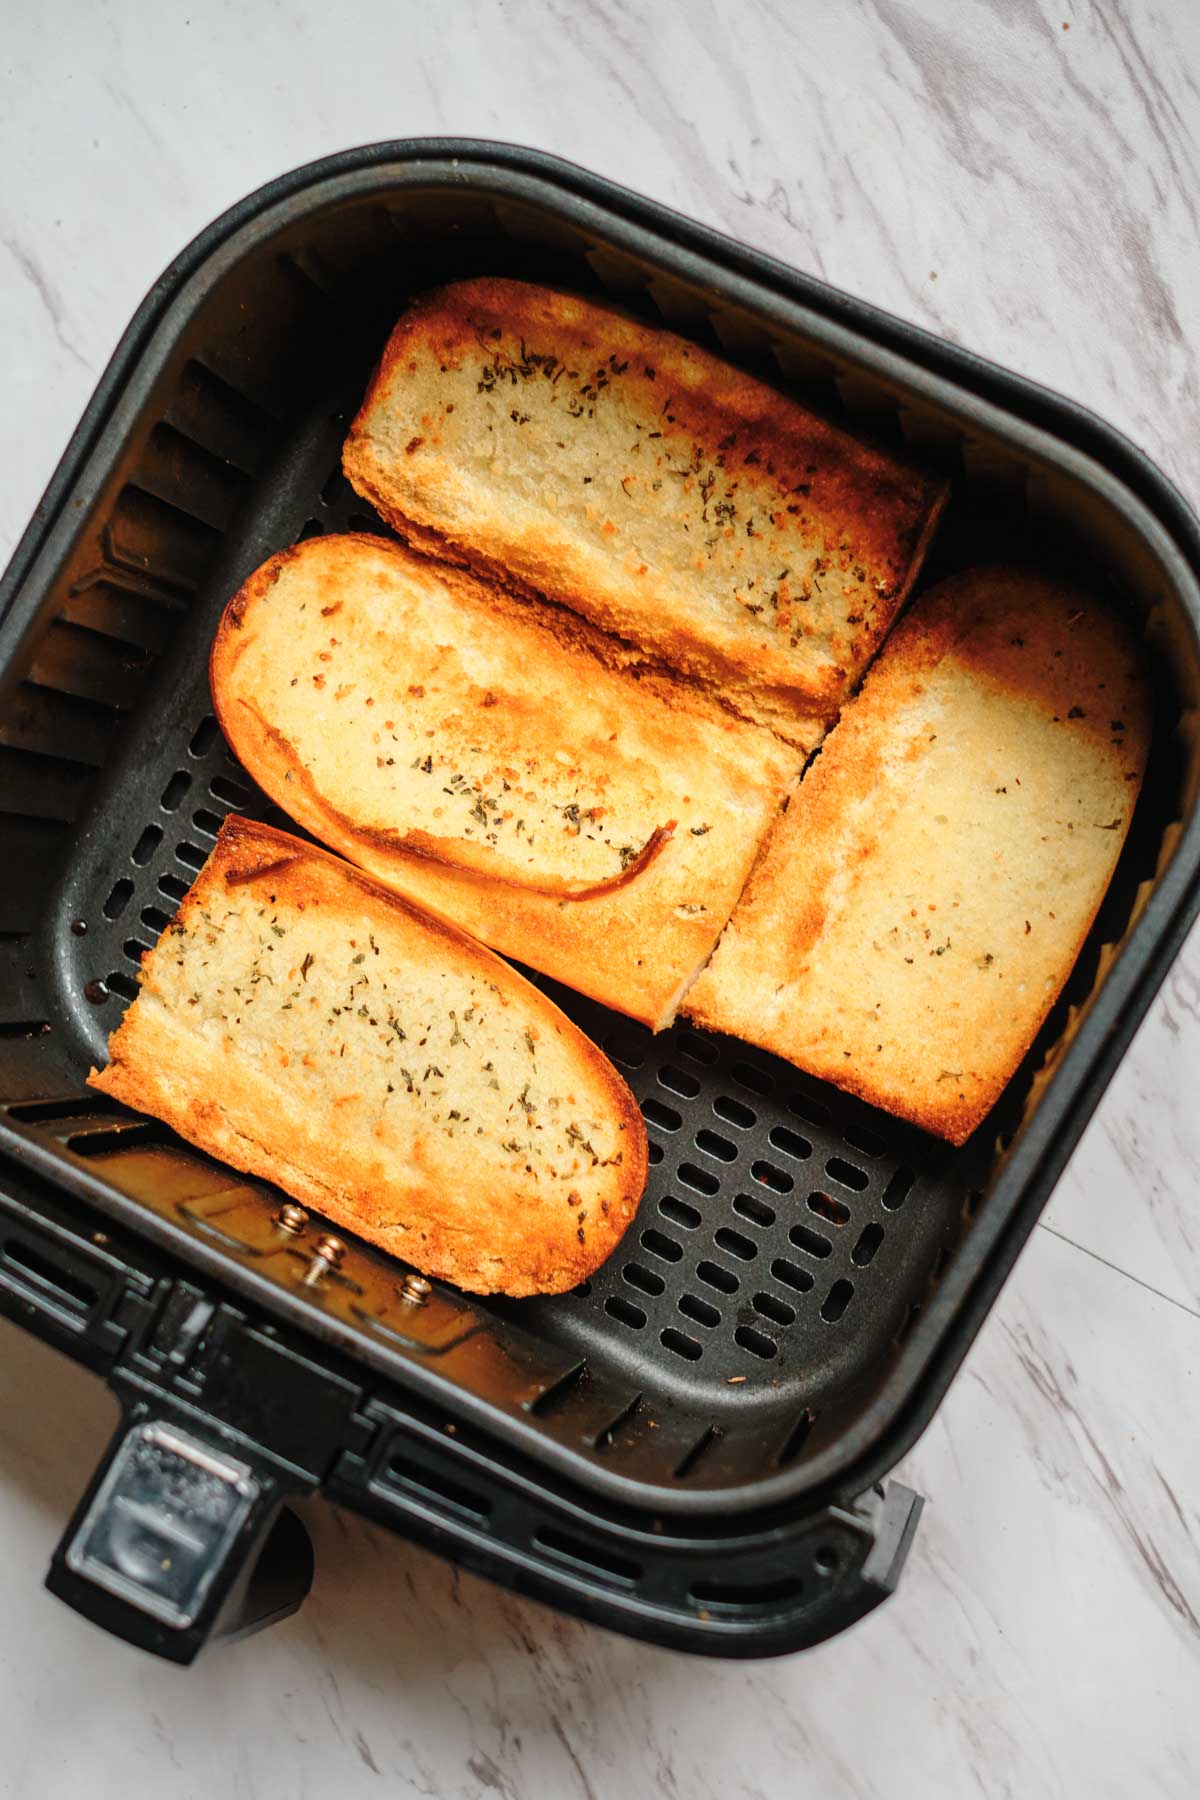 How To Cook Garlic Bread In Air Fryer